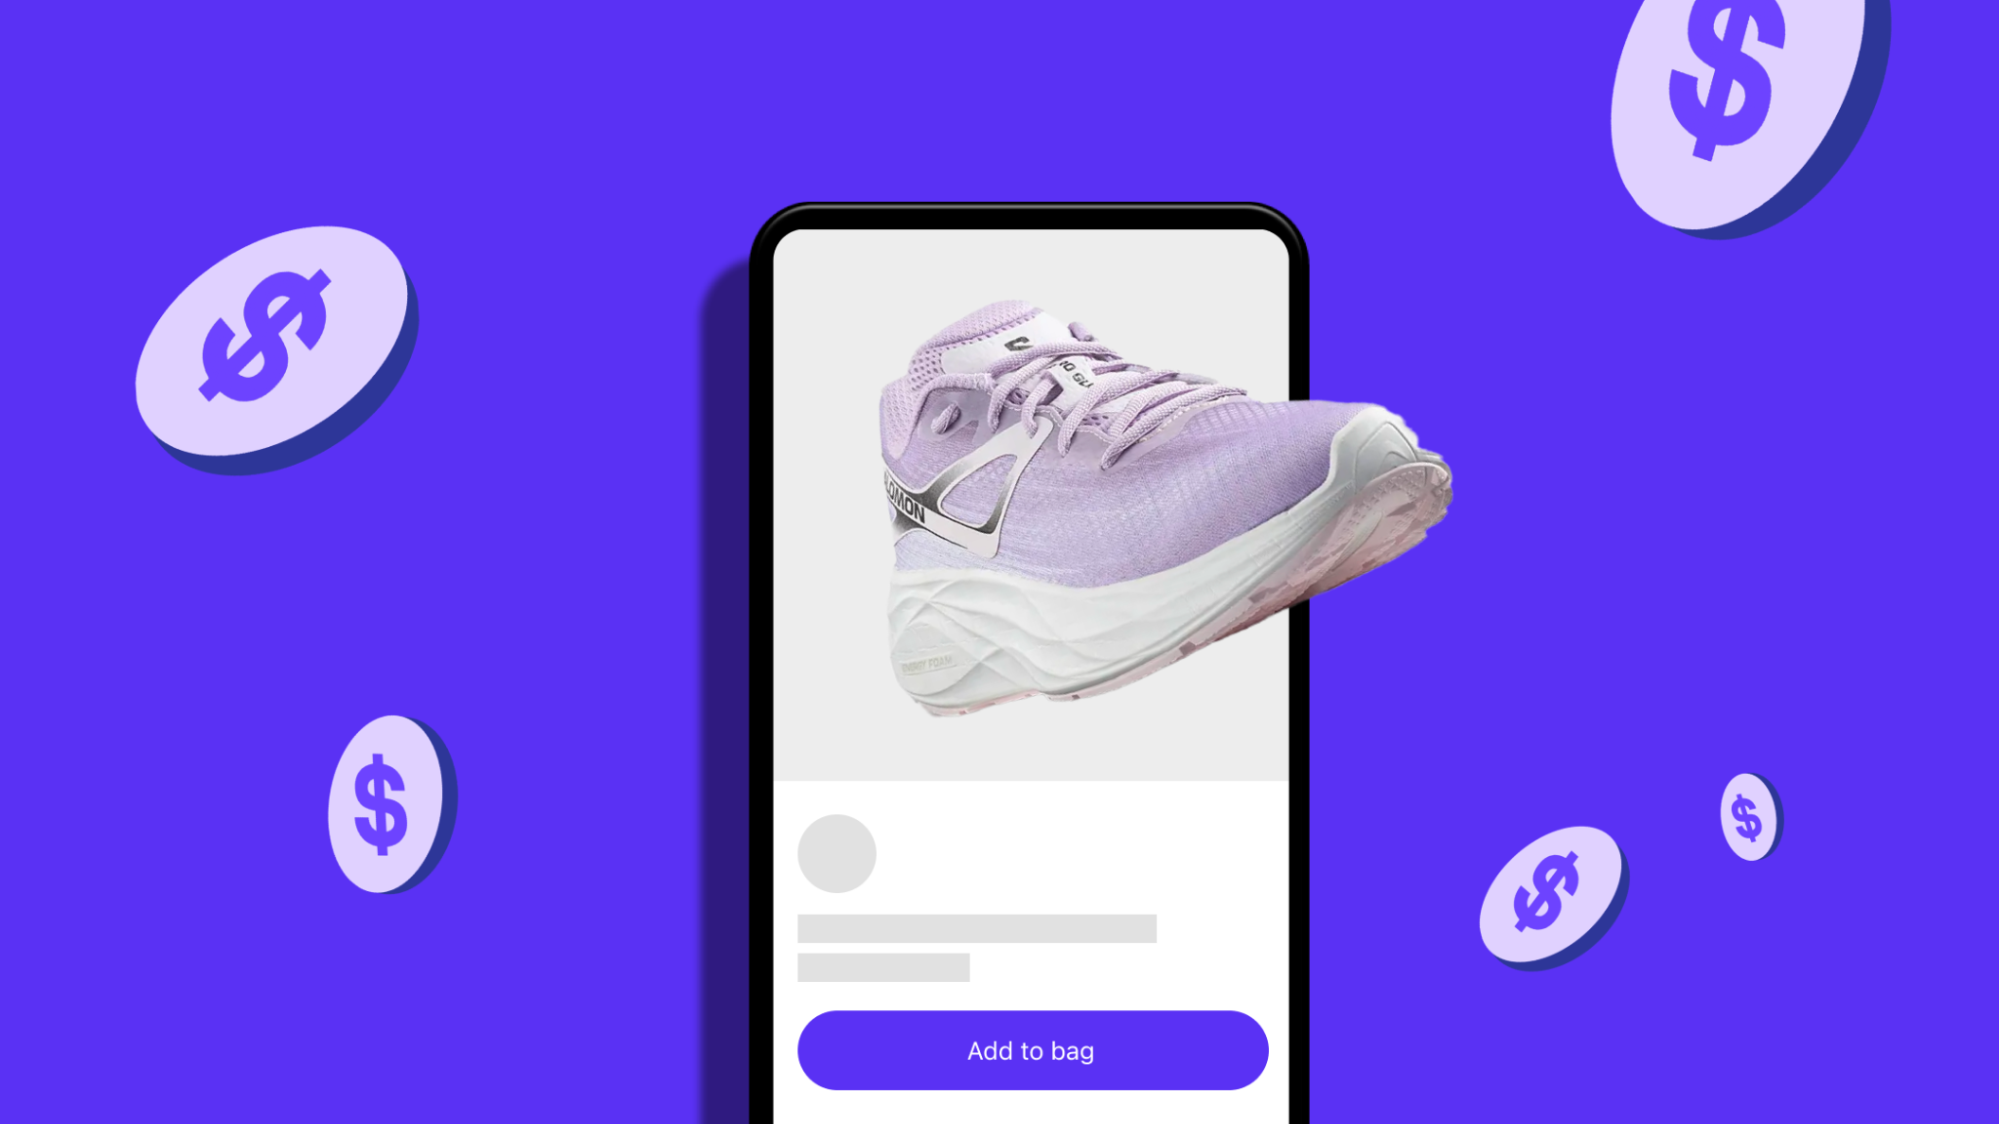 Illustration of a mobile app featuring a sneaker with dollar signs surrounding it.